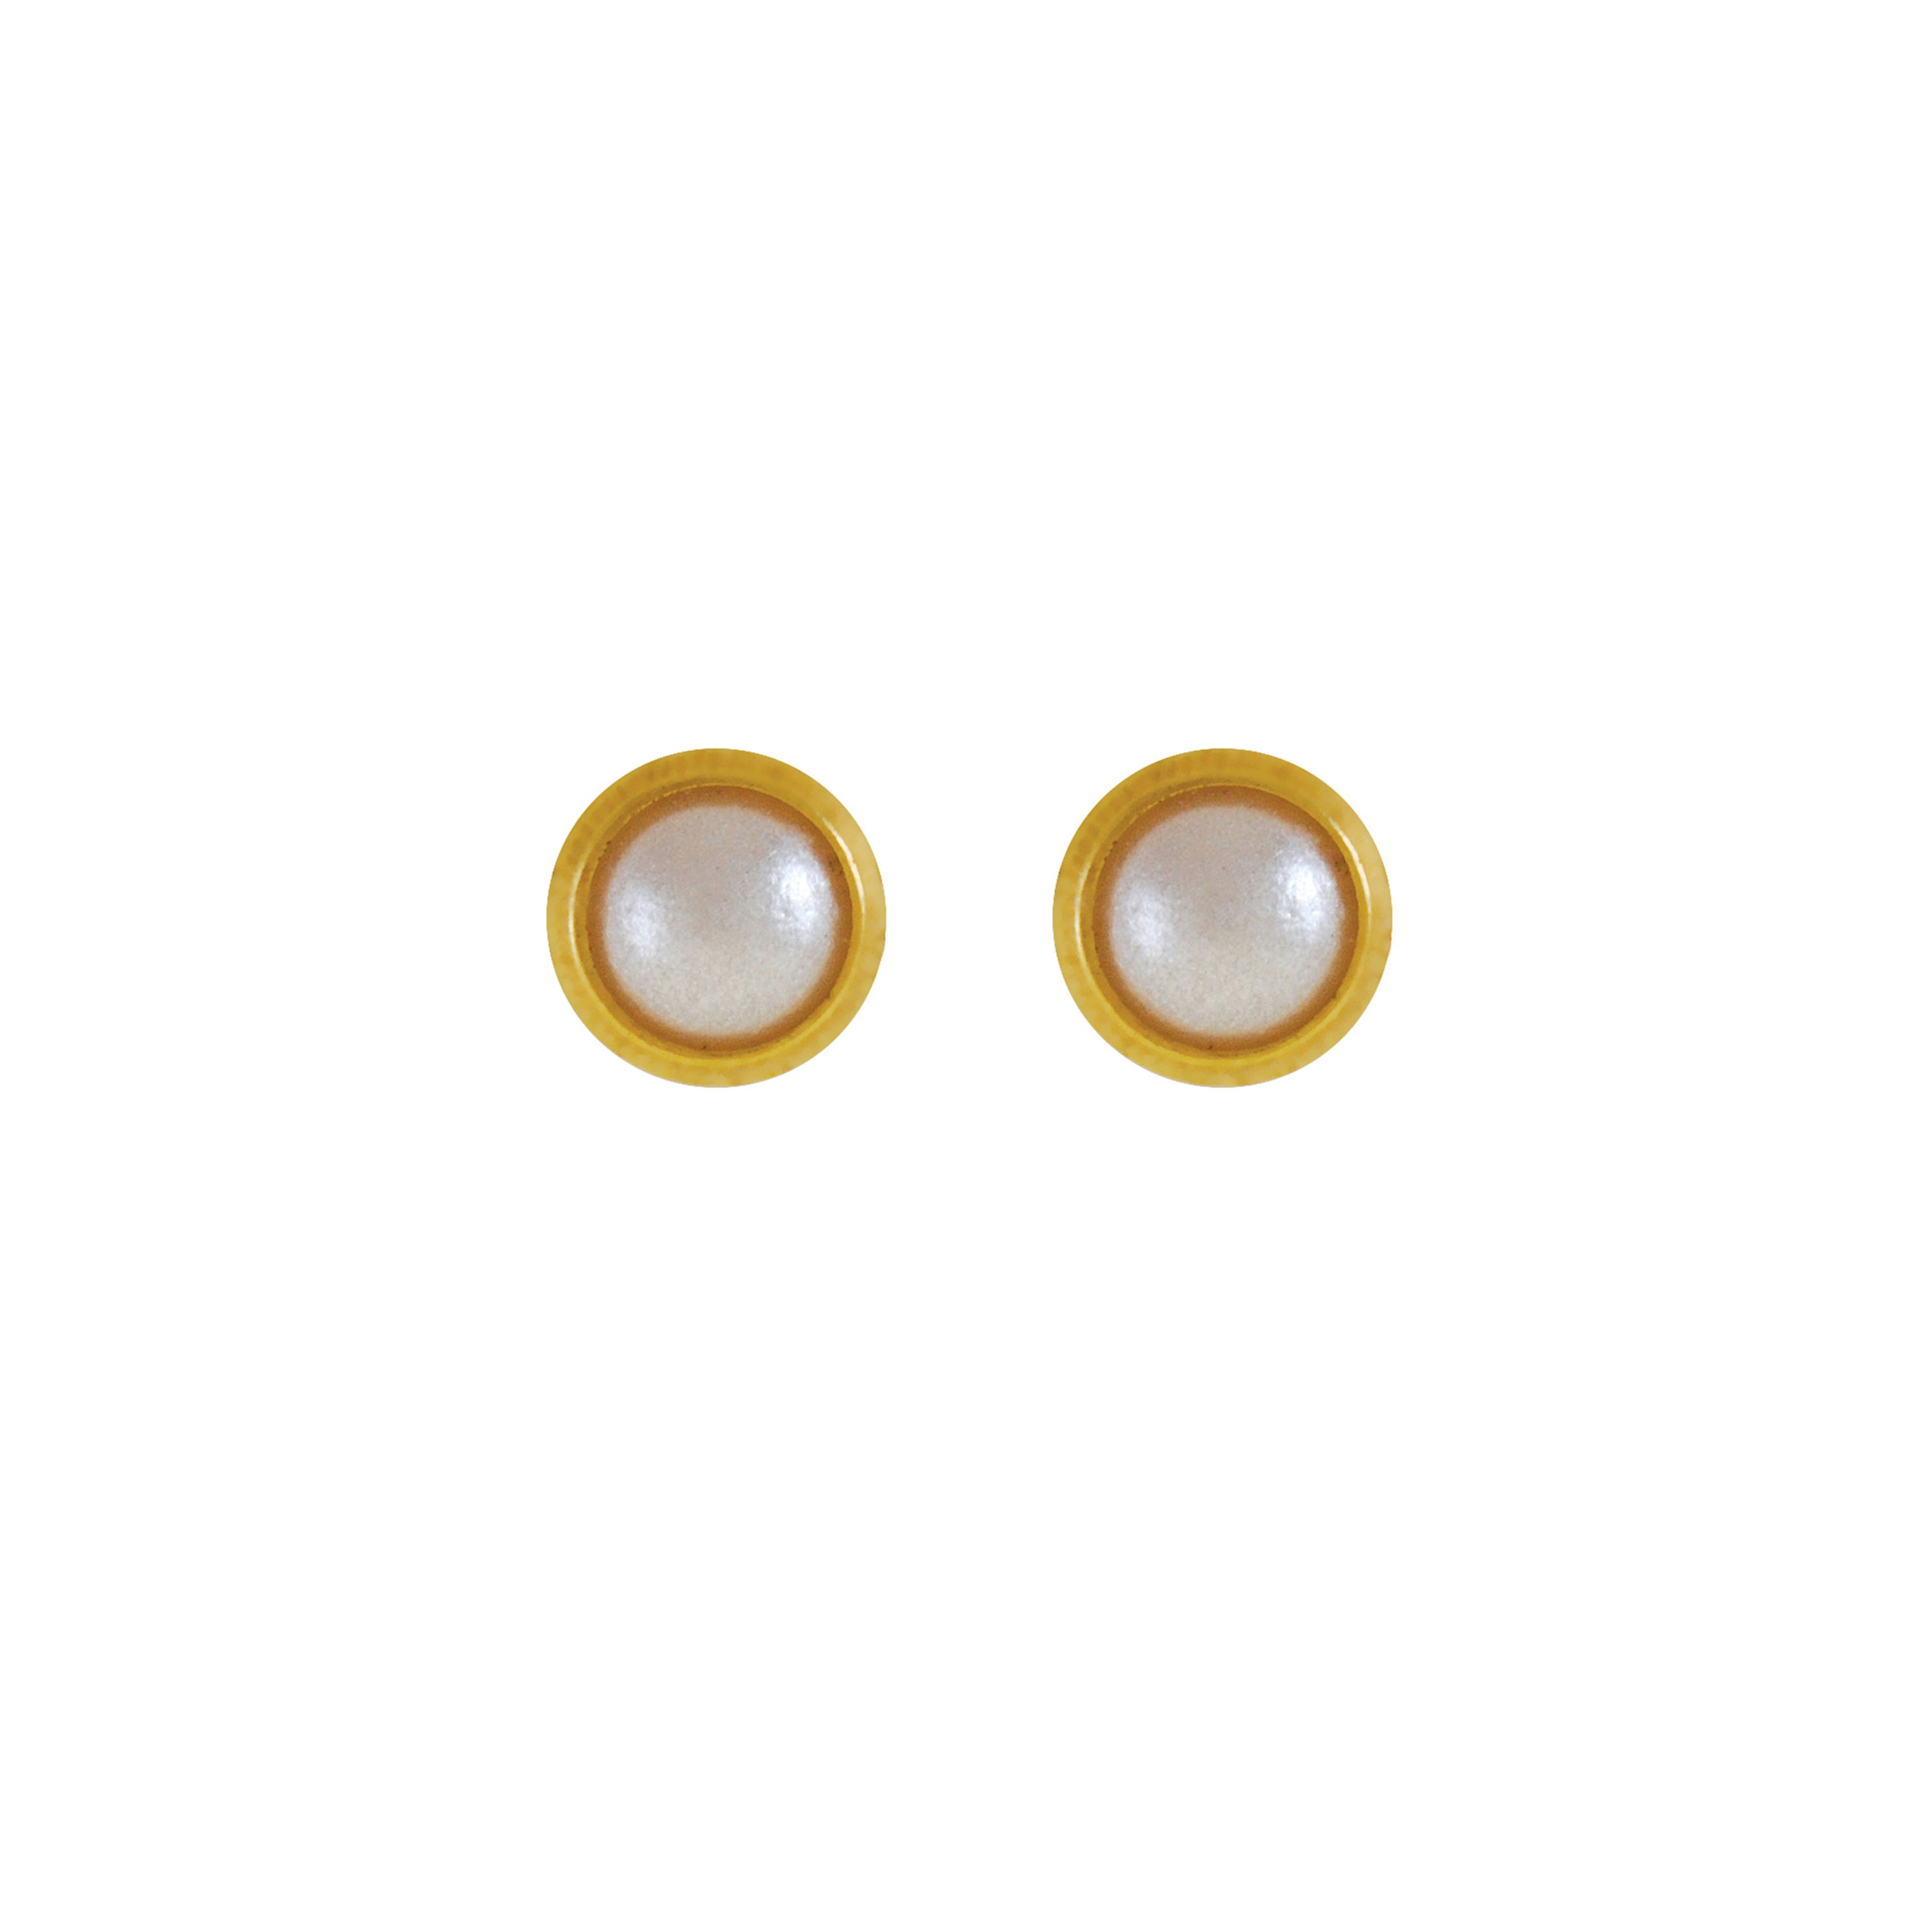 3MM - Bezel - White Pearl | 24K Pure Gold-Plated Piercing Earrings with Ear Piercing Cartridge | Studex System75